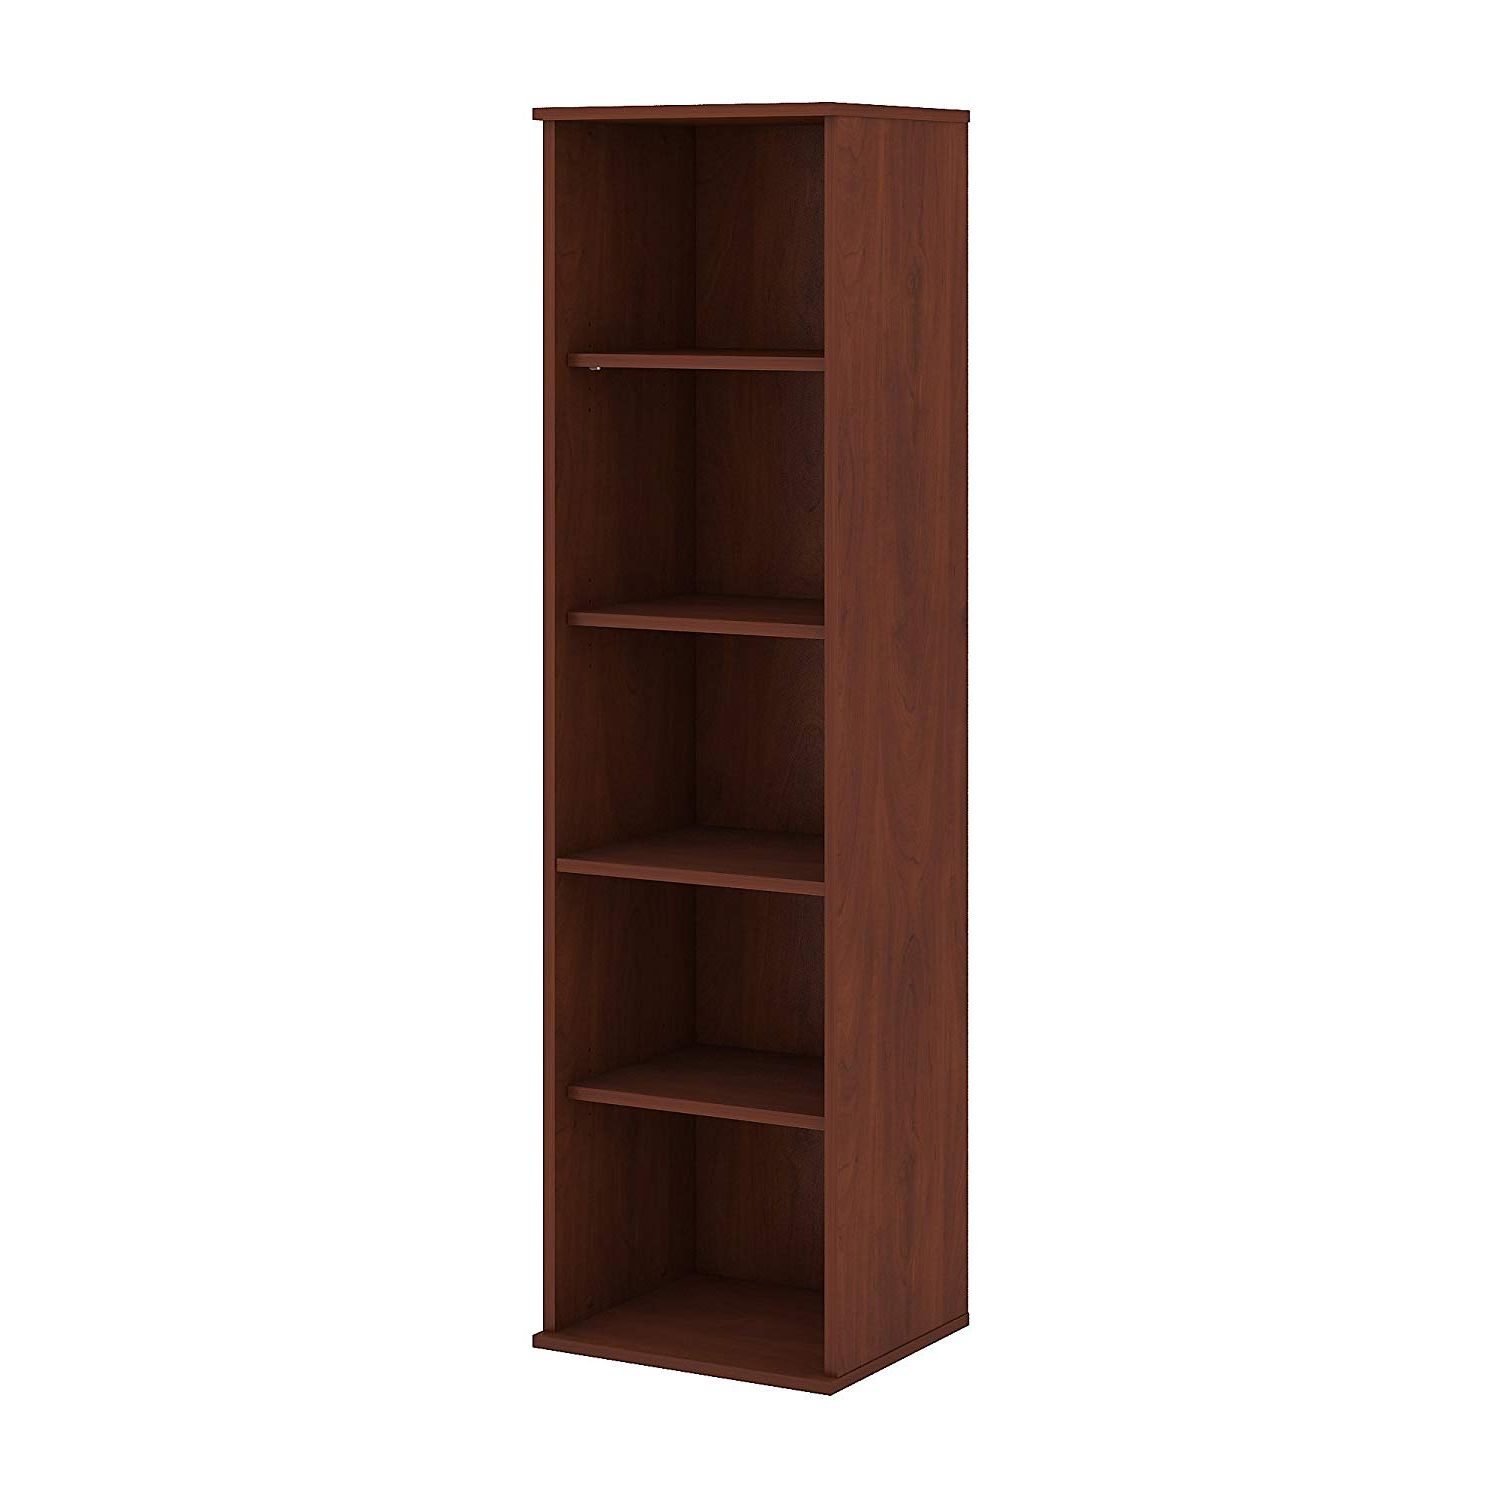 Latest Bush Business Furniture 66h 5 Shelf Narrow Bookcase In Hansen Cherry Within Narrow Profile Standard Cube Bookcases (View 15 of 20)